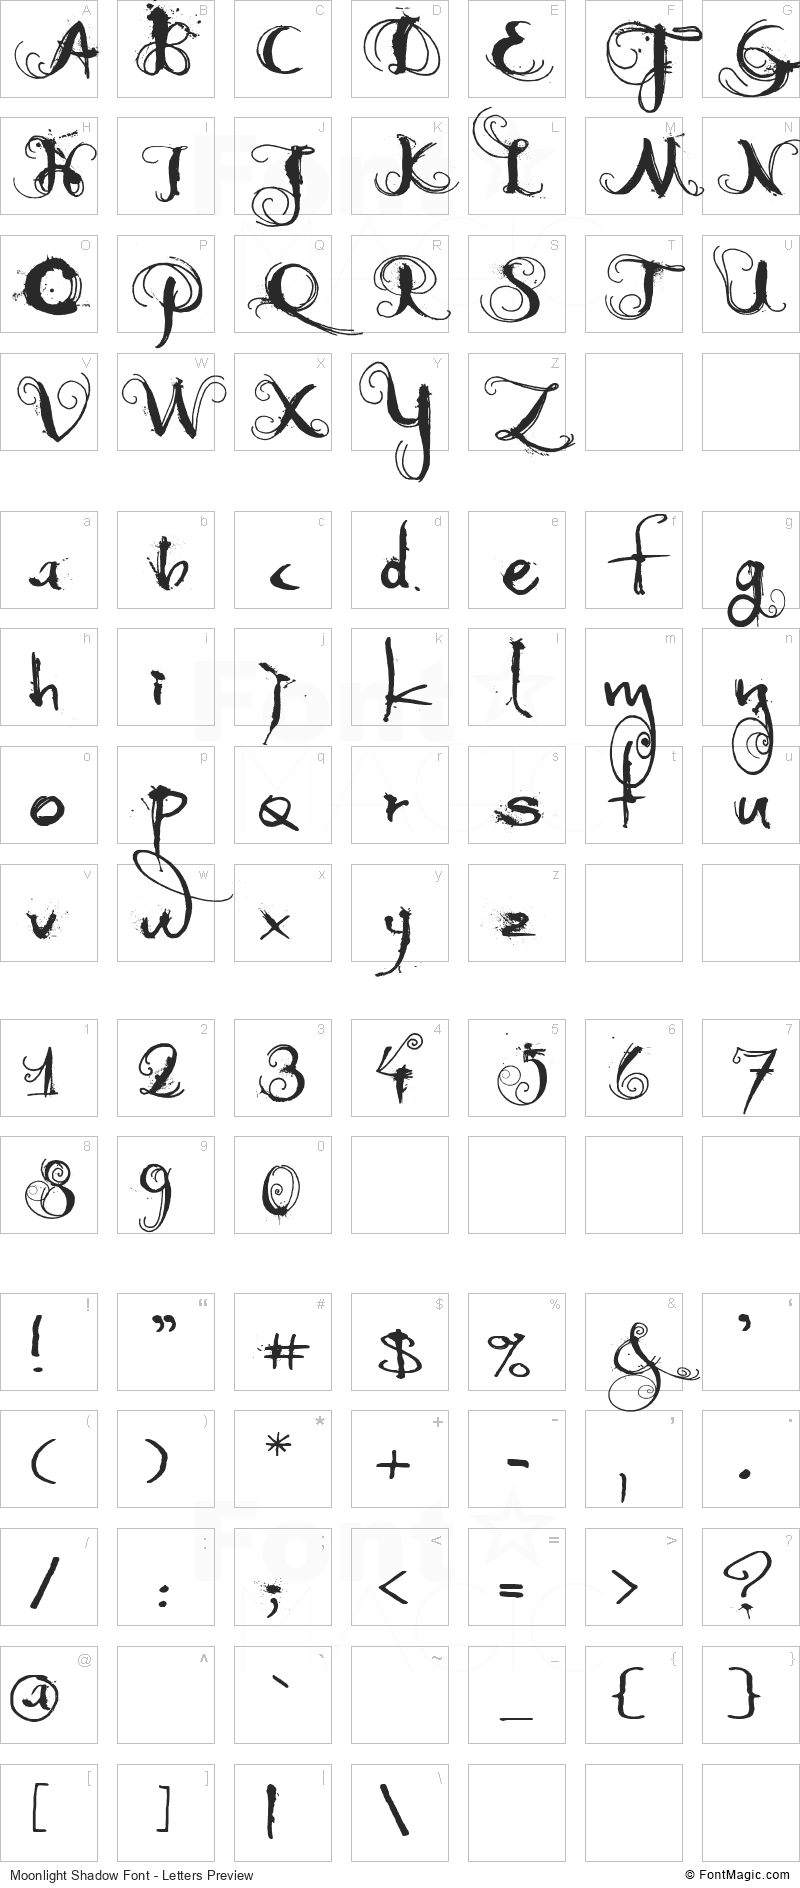 Moonlight Shadow Font - All Latters Preview Chart